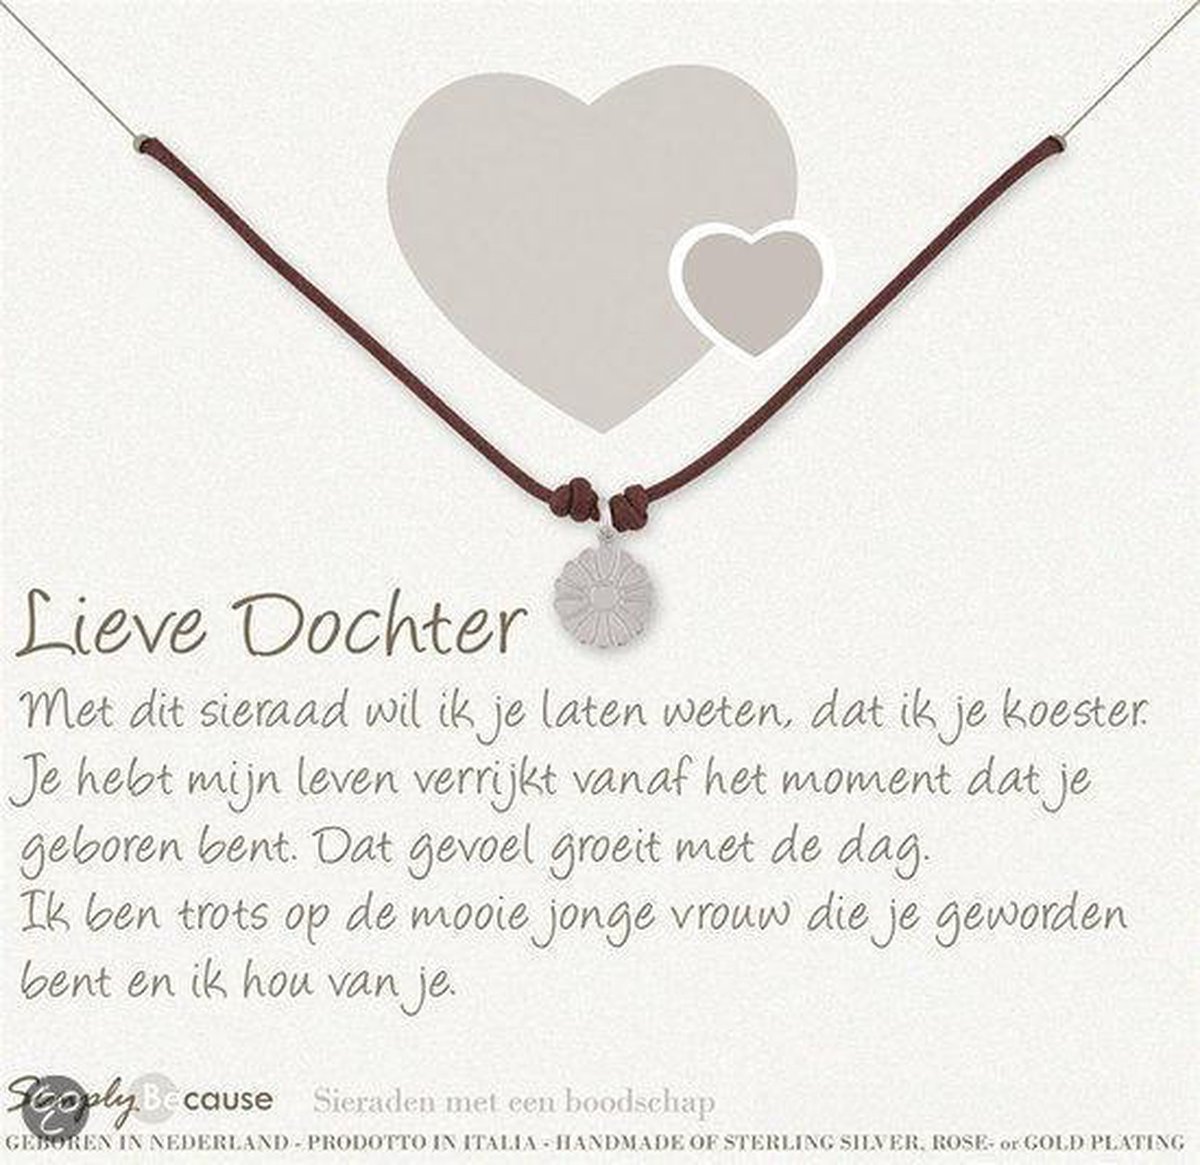 Hedendaags bol.com | Simply Because Lieve Dochter! Wax-armband (zilver, bedel TS-12